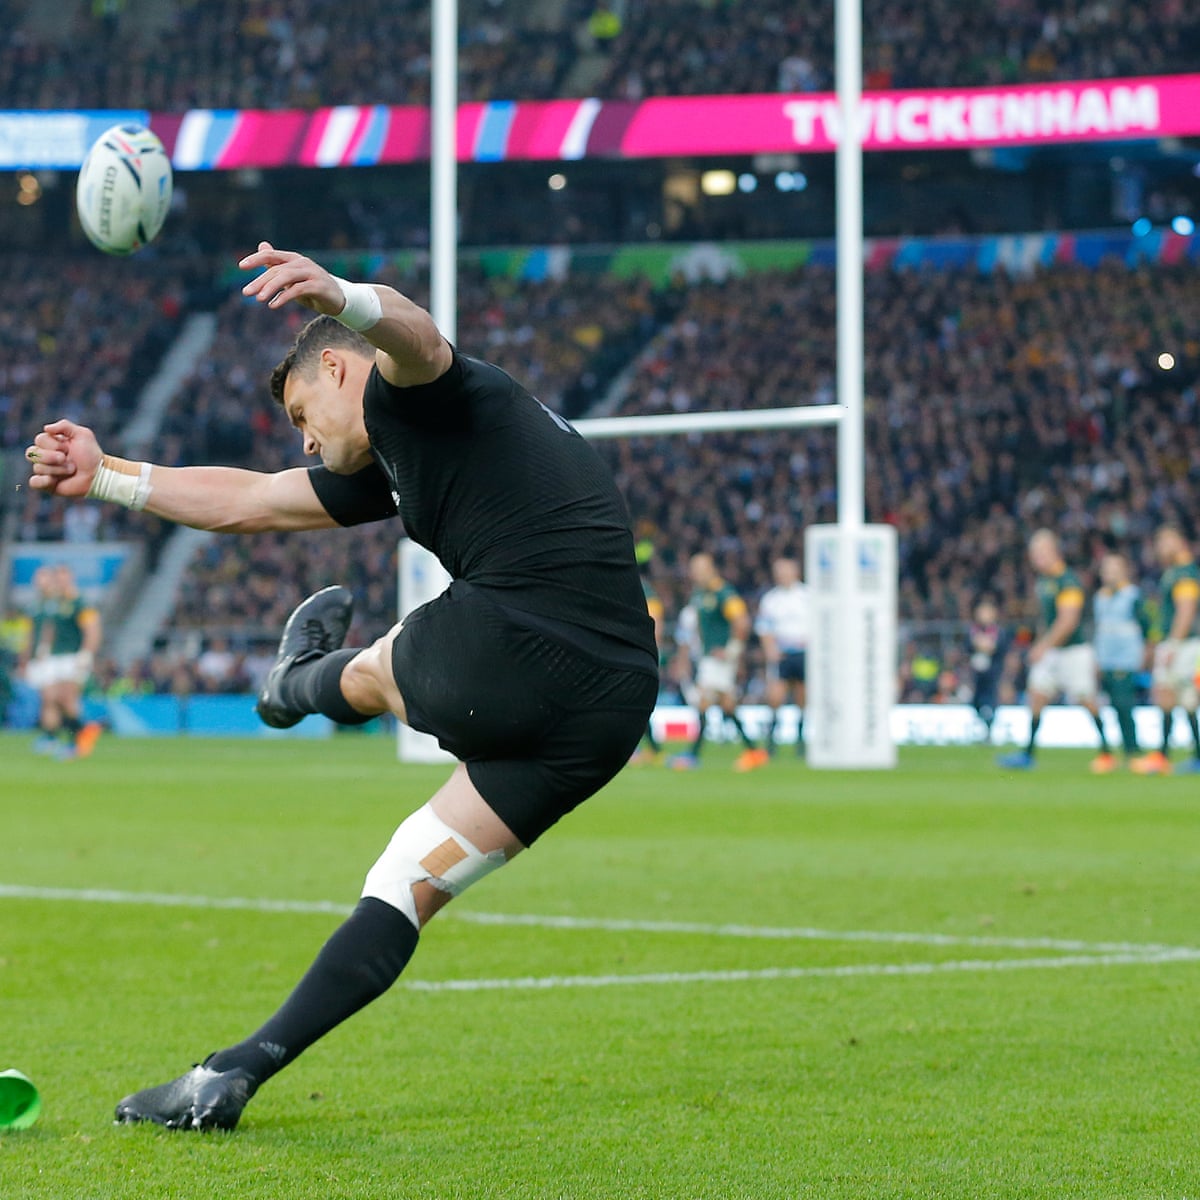 Dan Carter reigns supreme in his element as New Zealand keep cool